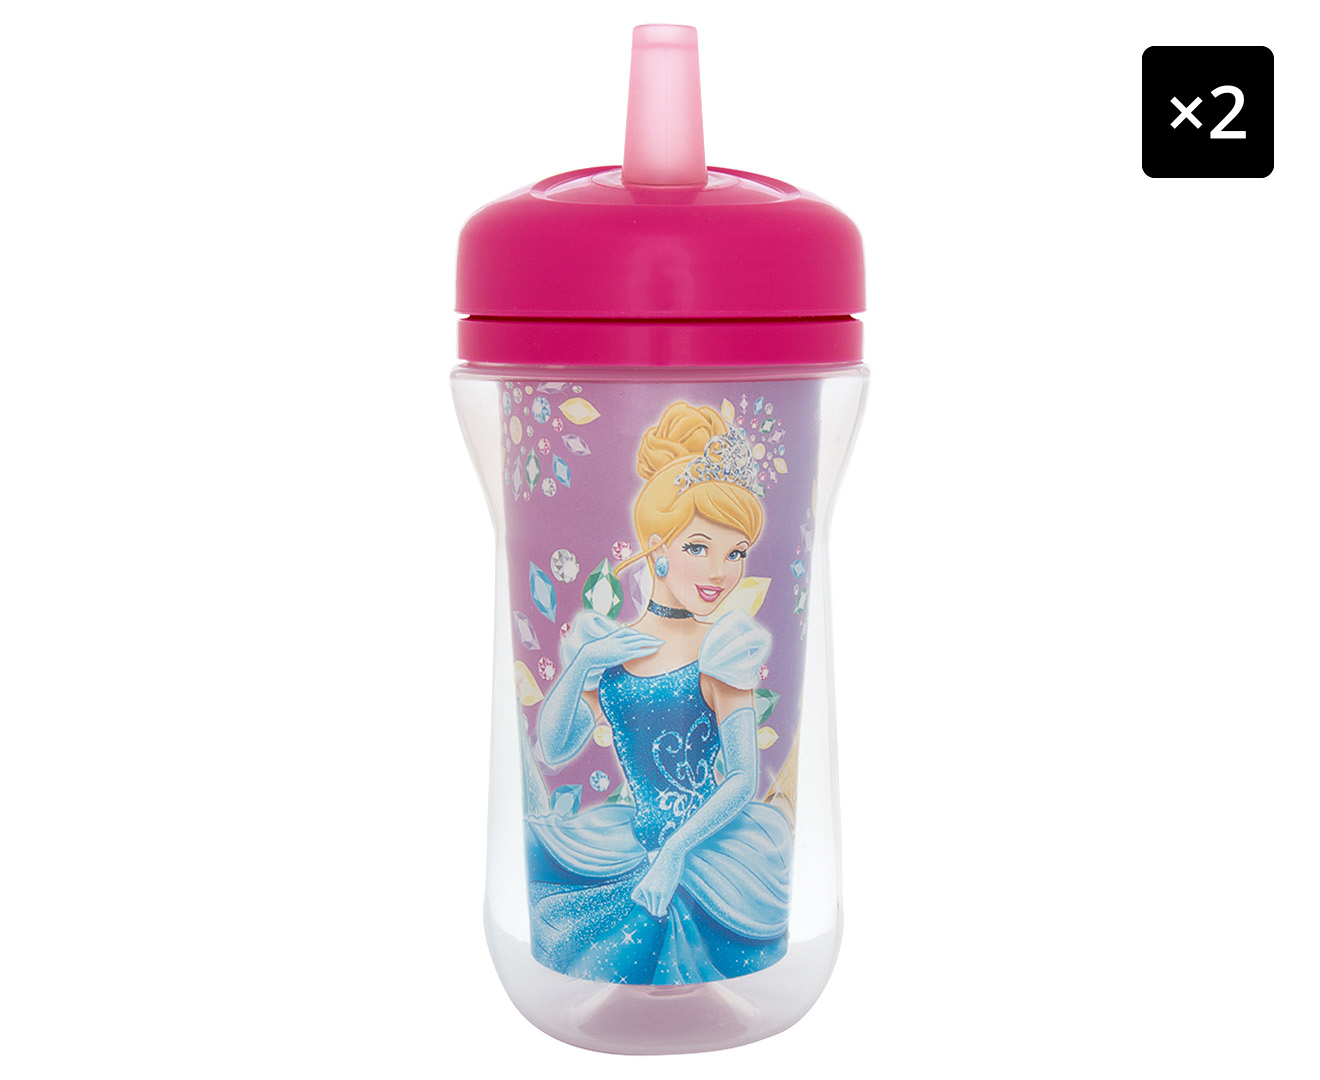 2 x Disney Princess 266mL Insulated Straw Cup Pink/Clear